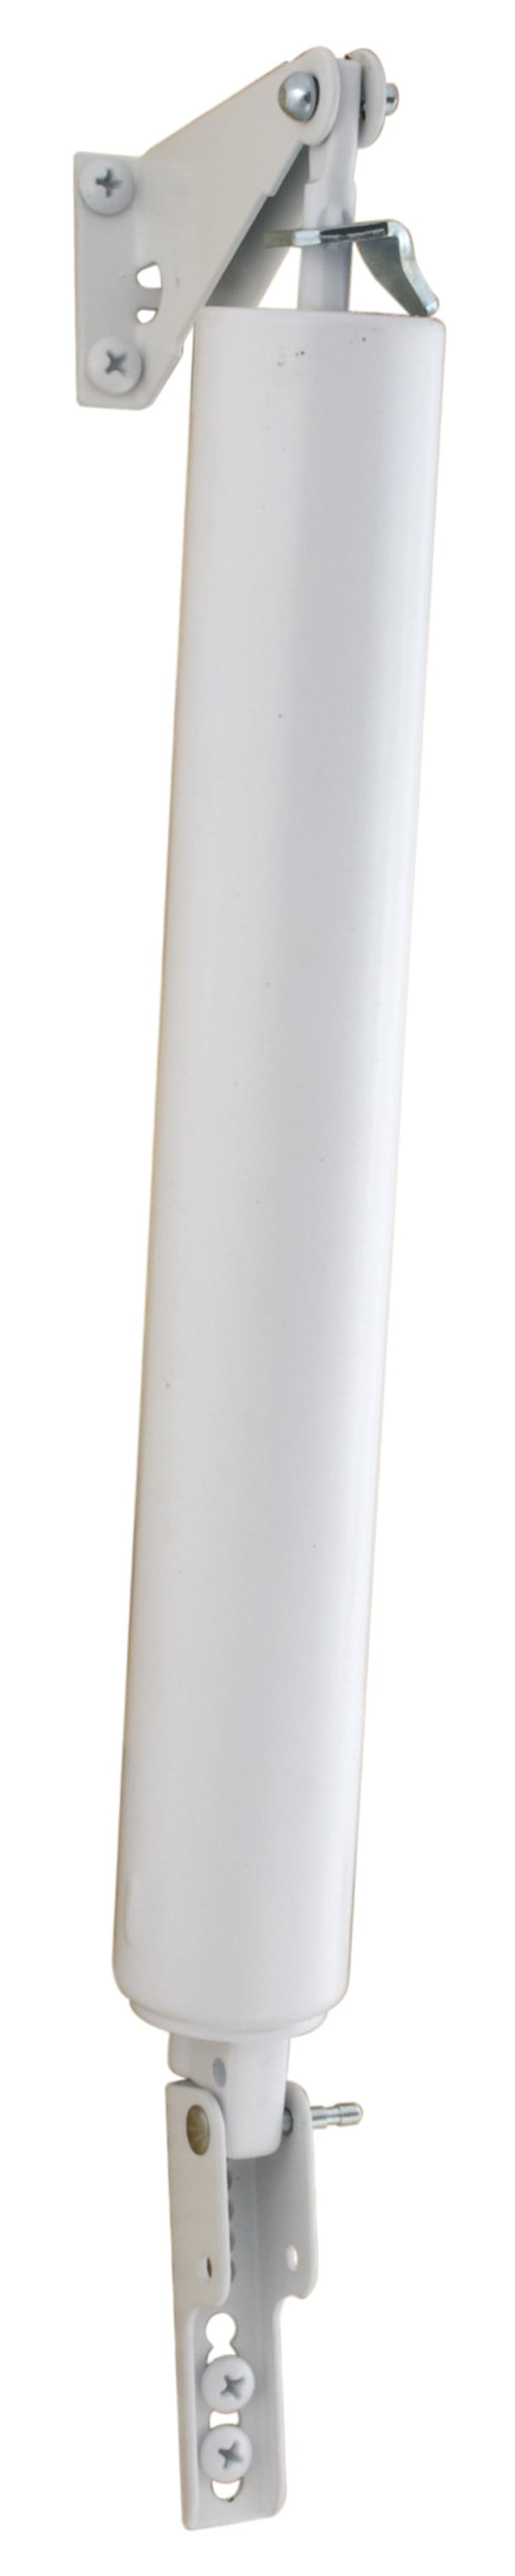 Wright Products V1020WH Standard Duty Pneumatic Closer White 